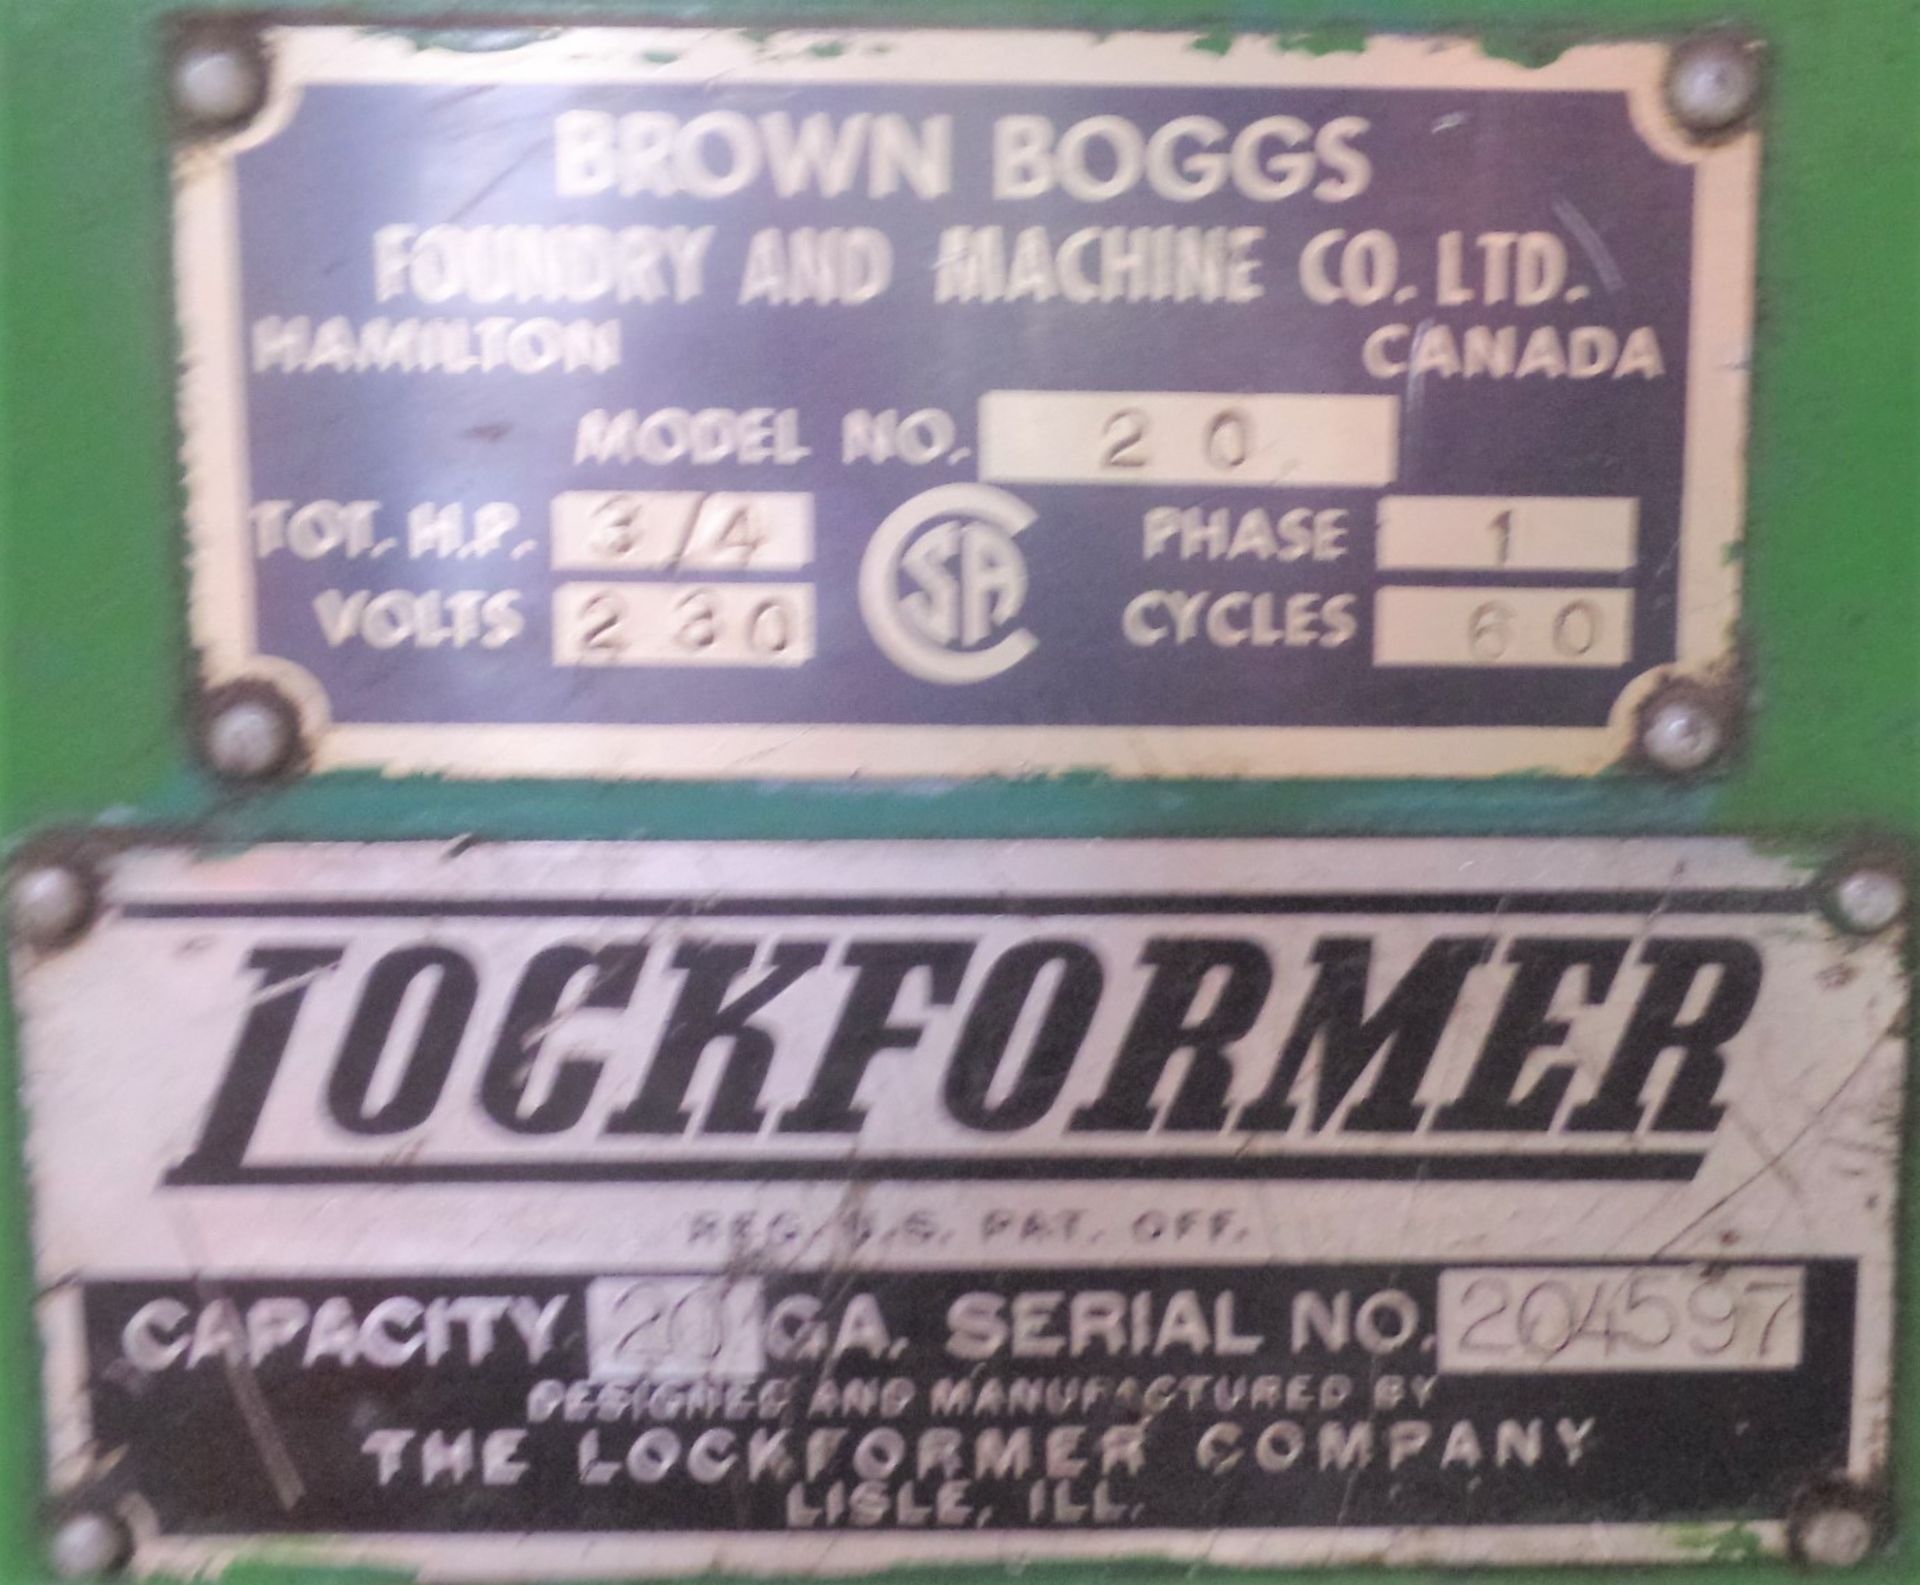 BROWN BOGGS / LOCKFORMER MODEL 20 PITTSBURGH MACHINE, (5) FORMING STATIONS, AUTO GUIDE POWER - Image 7 of 8